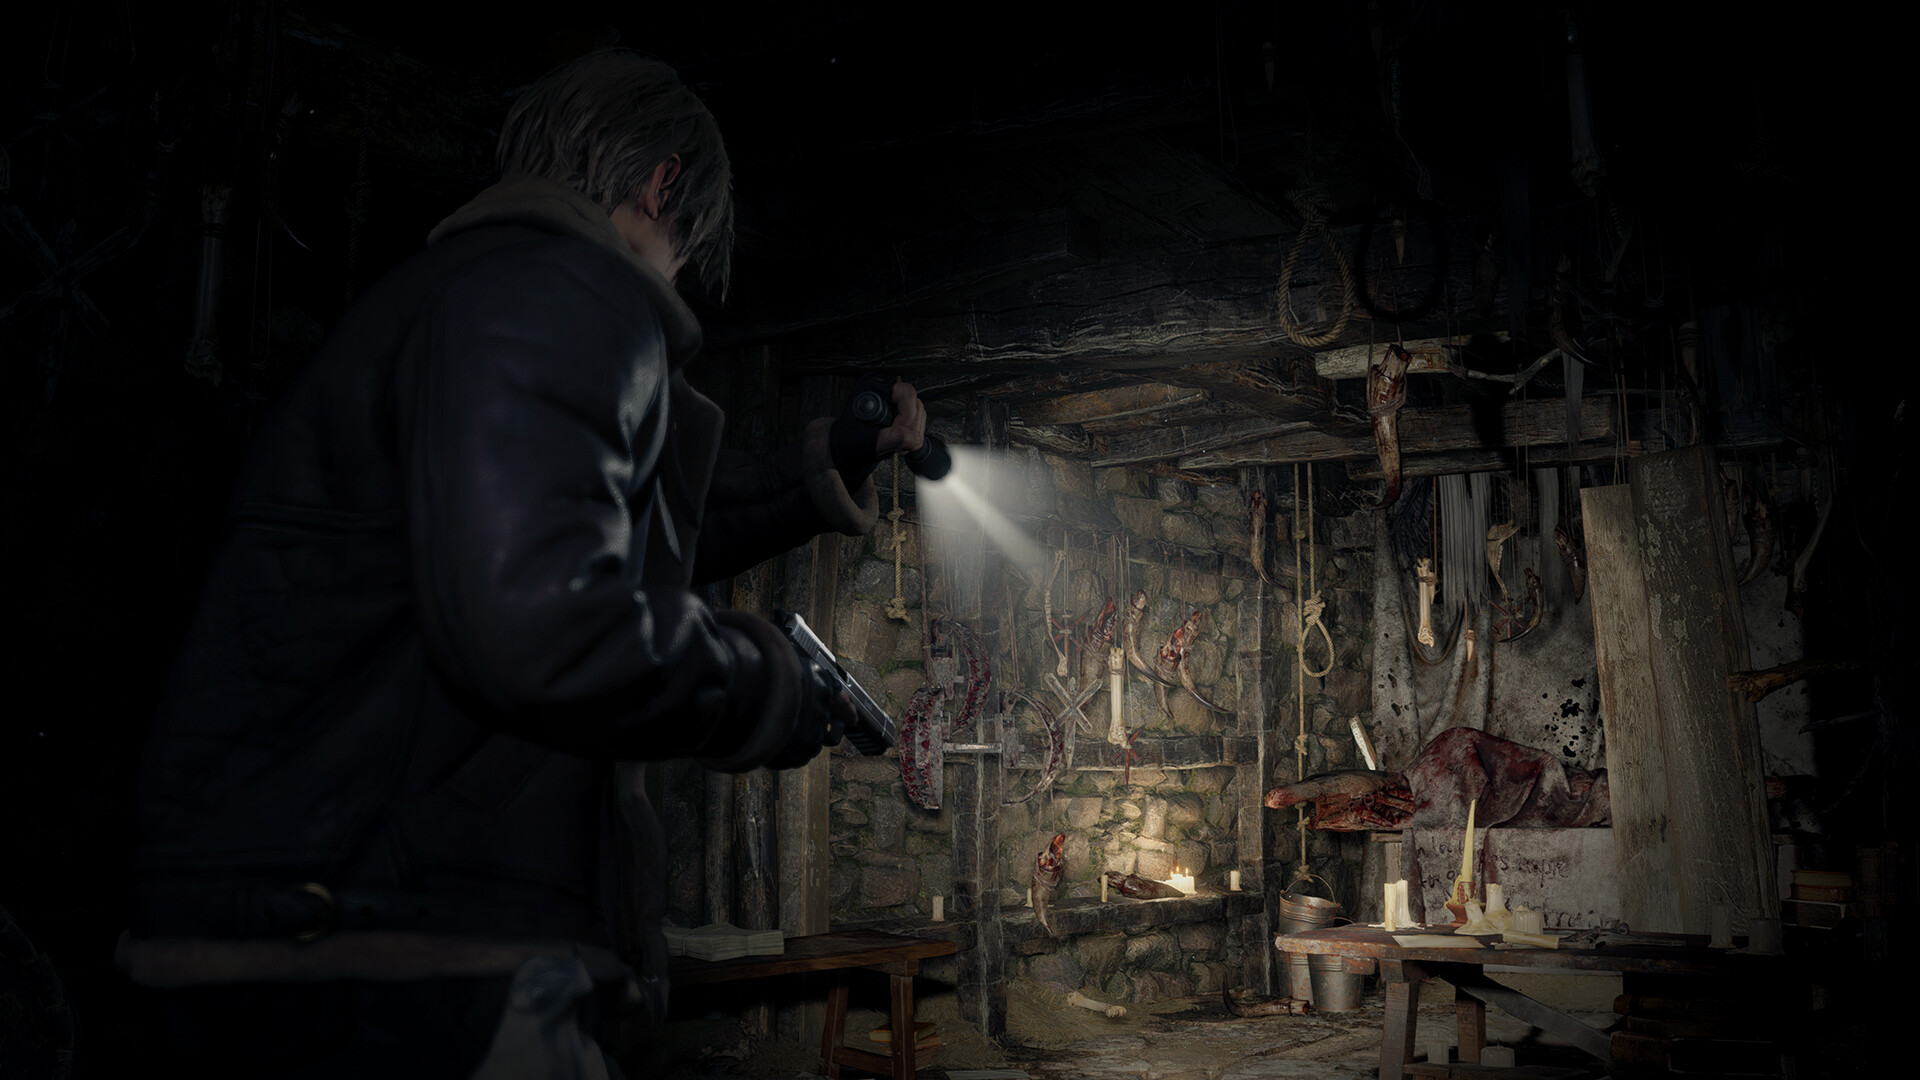 Resident Evil 4 Remake Hands-On Preview (PS5) - Back In The Village -  PlayStation Universe